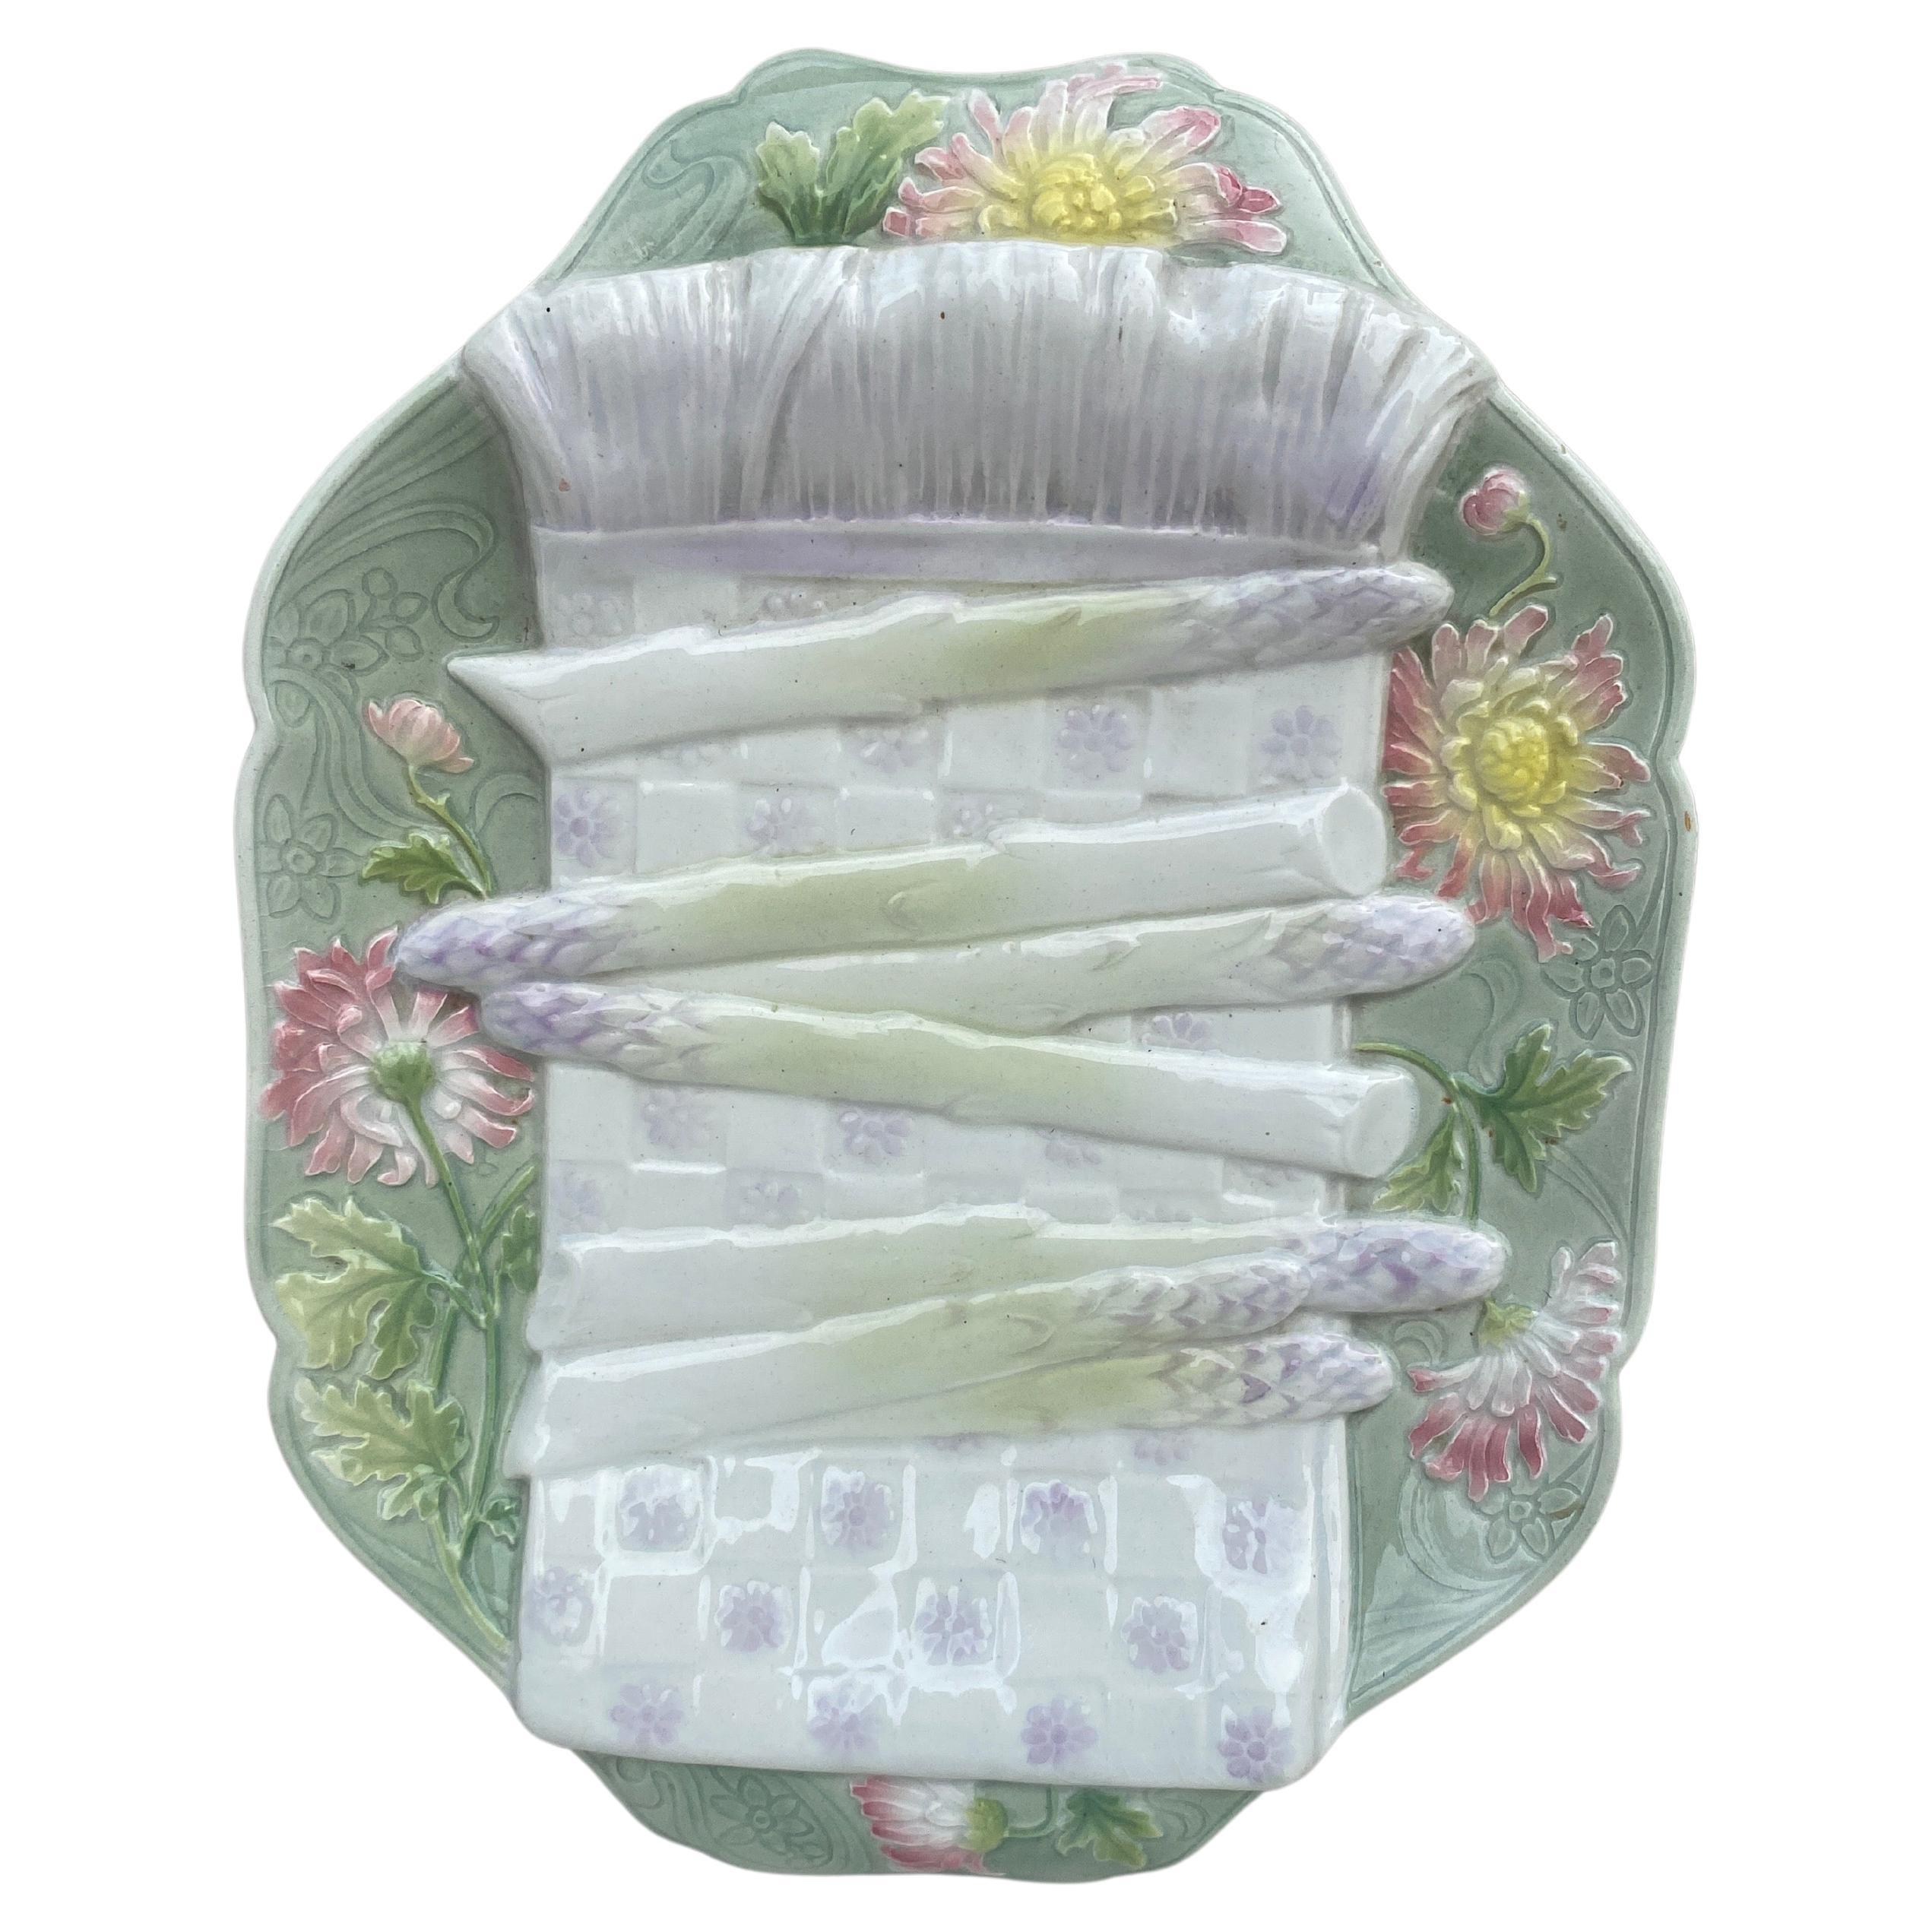 Majolica asparagus platter by Keller and Guerin, manufacturer of Saint Clement, circa 1900.Trompe l’oeil napkin and pink chrysanthemums.